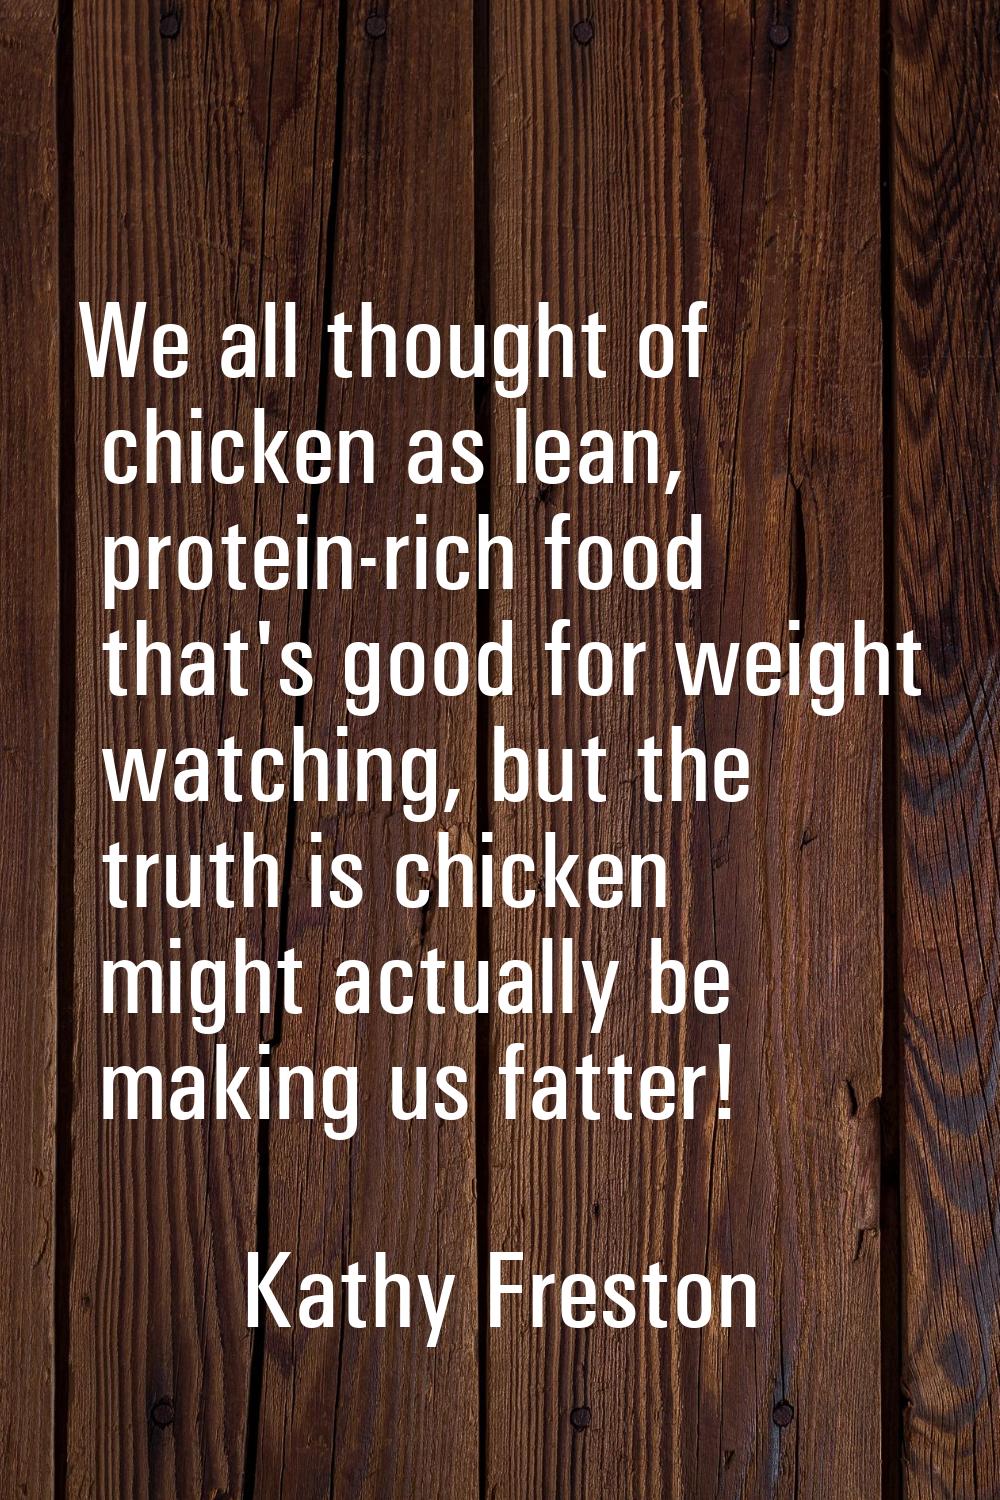 We all thought of chicken as lean, protein-rich food that's good for weight watching, but the truth